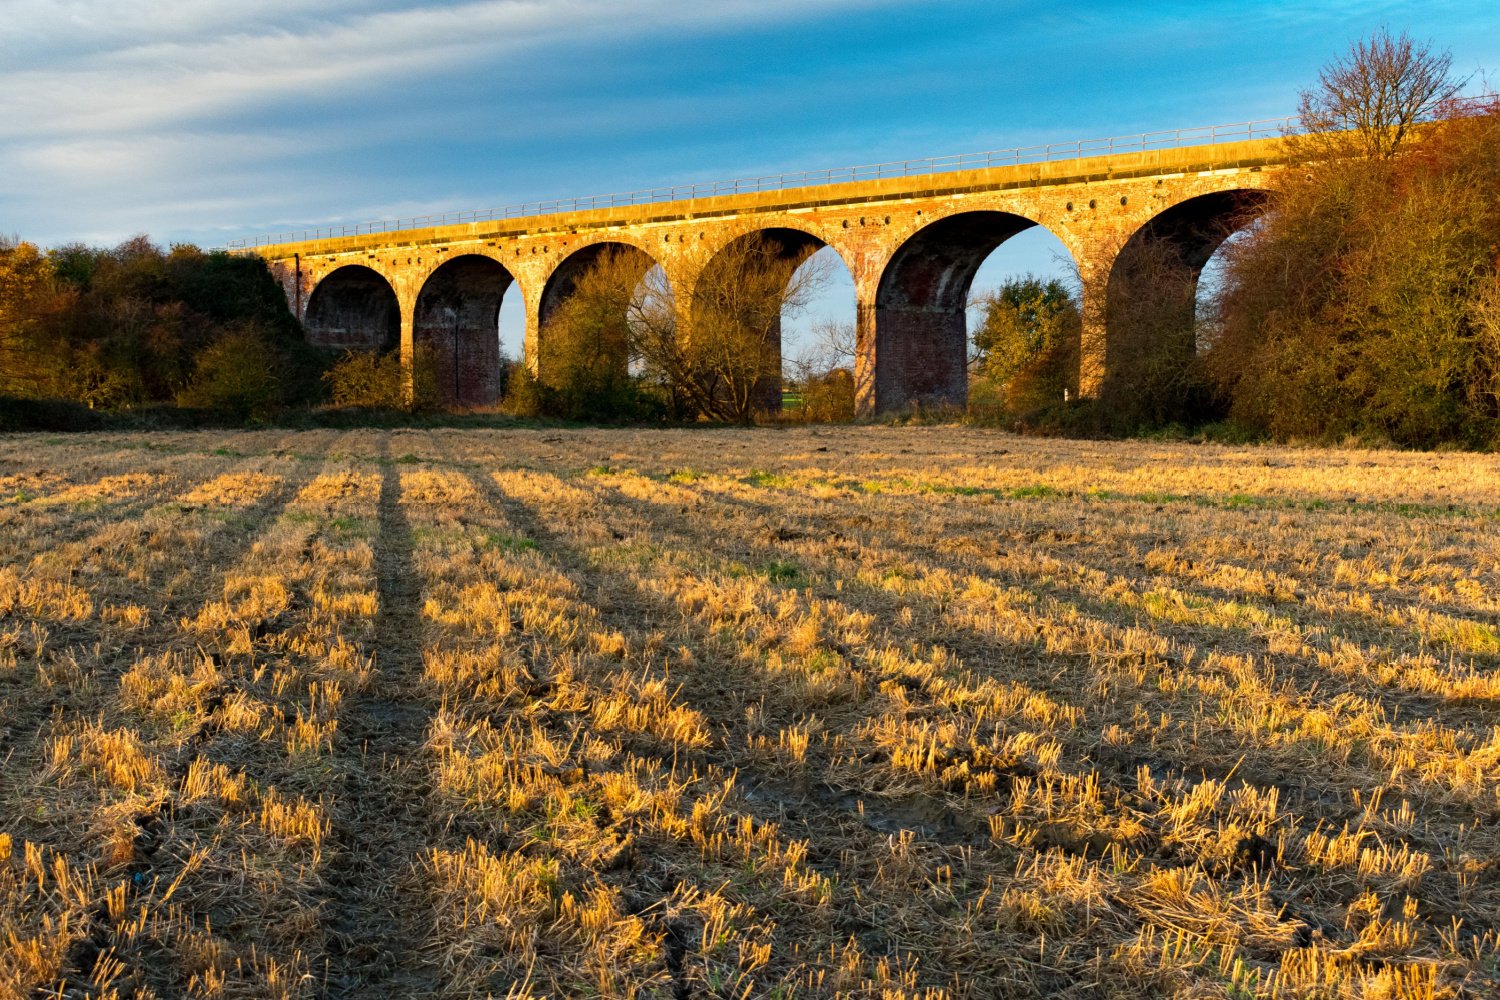 Image name ackworth rail viaduct yorkshire the 7 image from the post Walk: Wentbridge in Yorkshire.com.